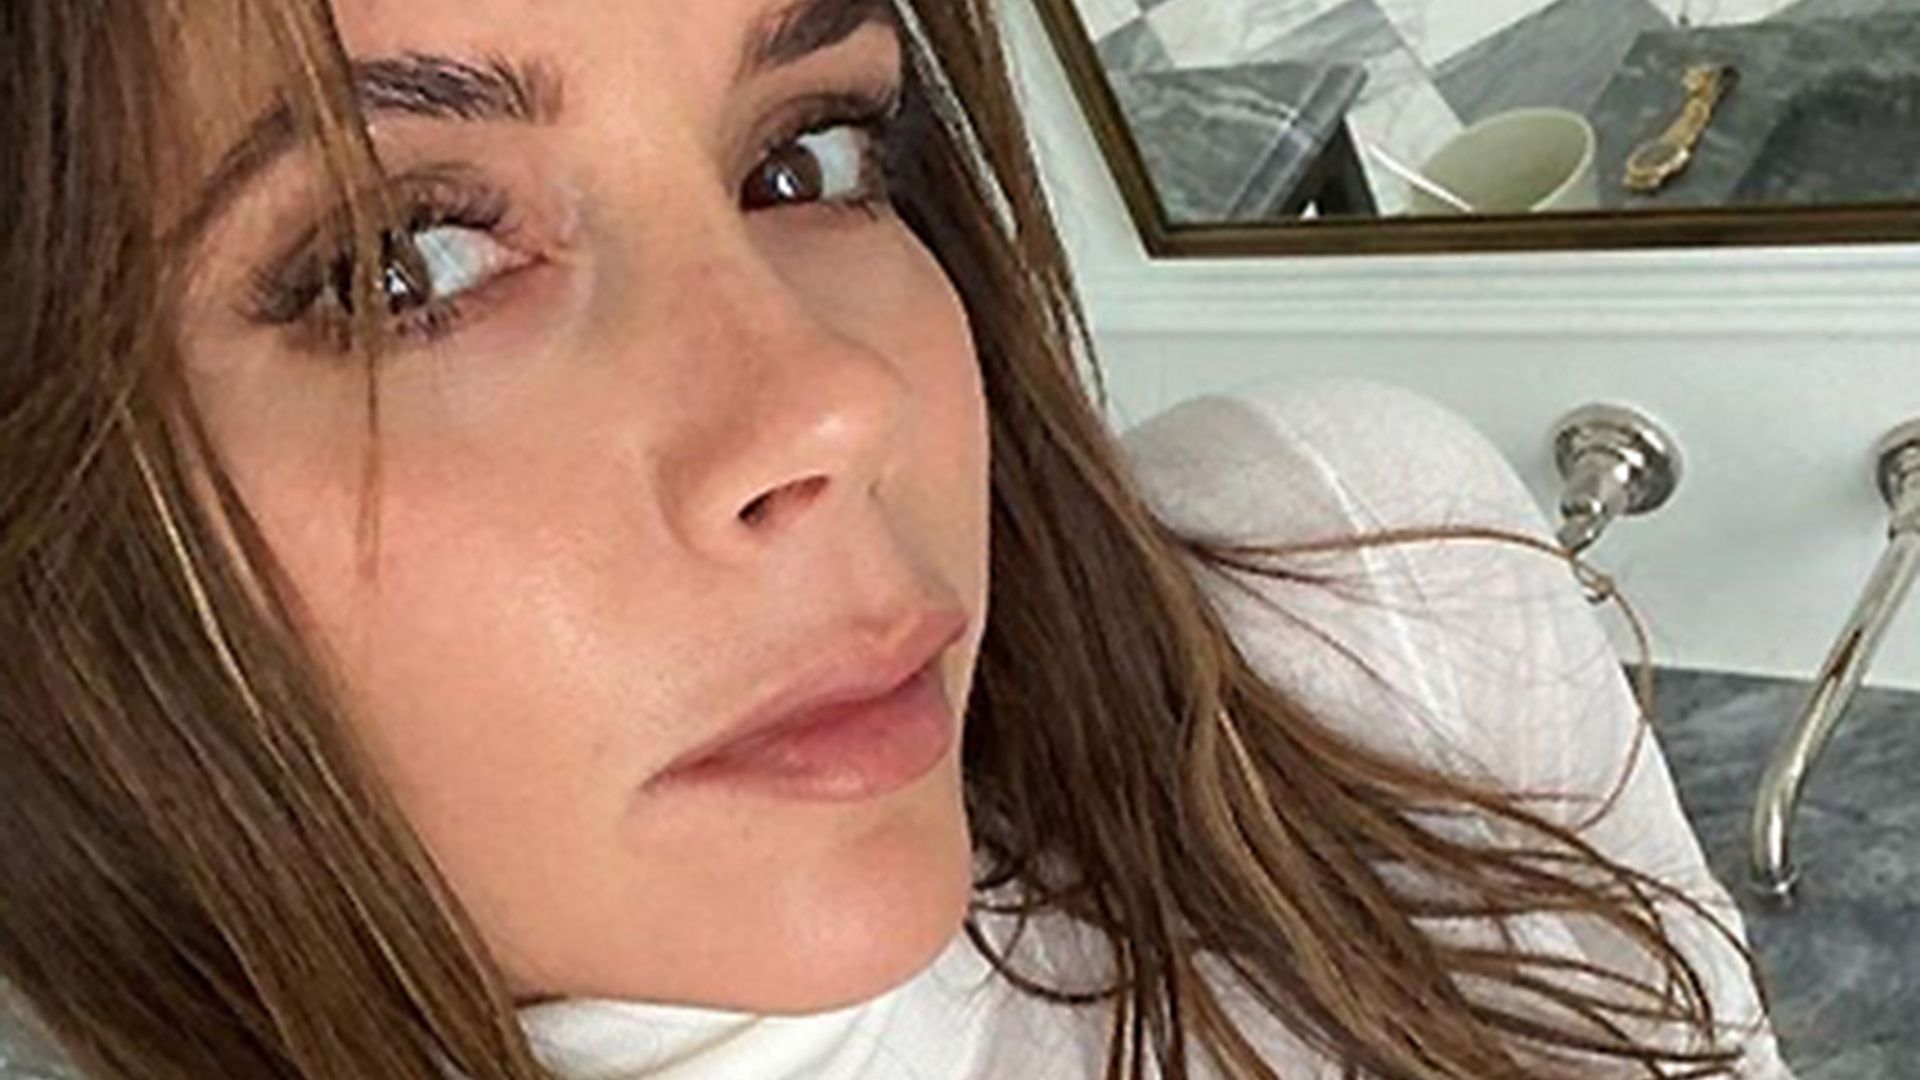 Victoria Beckham works from home in tiny denim shorts - and looks incredible, of course